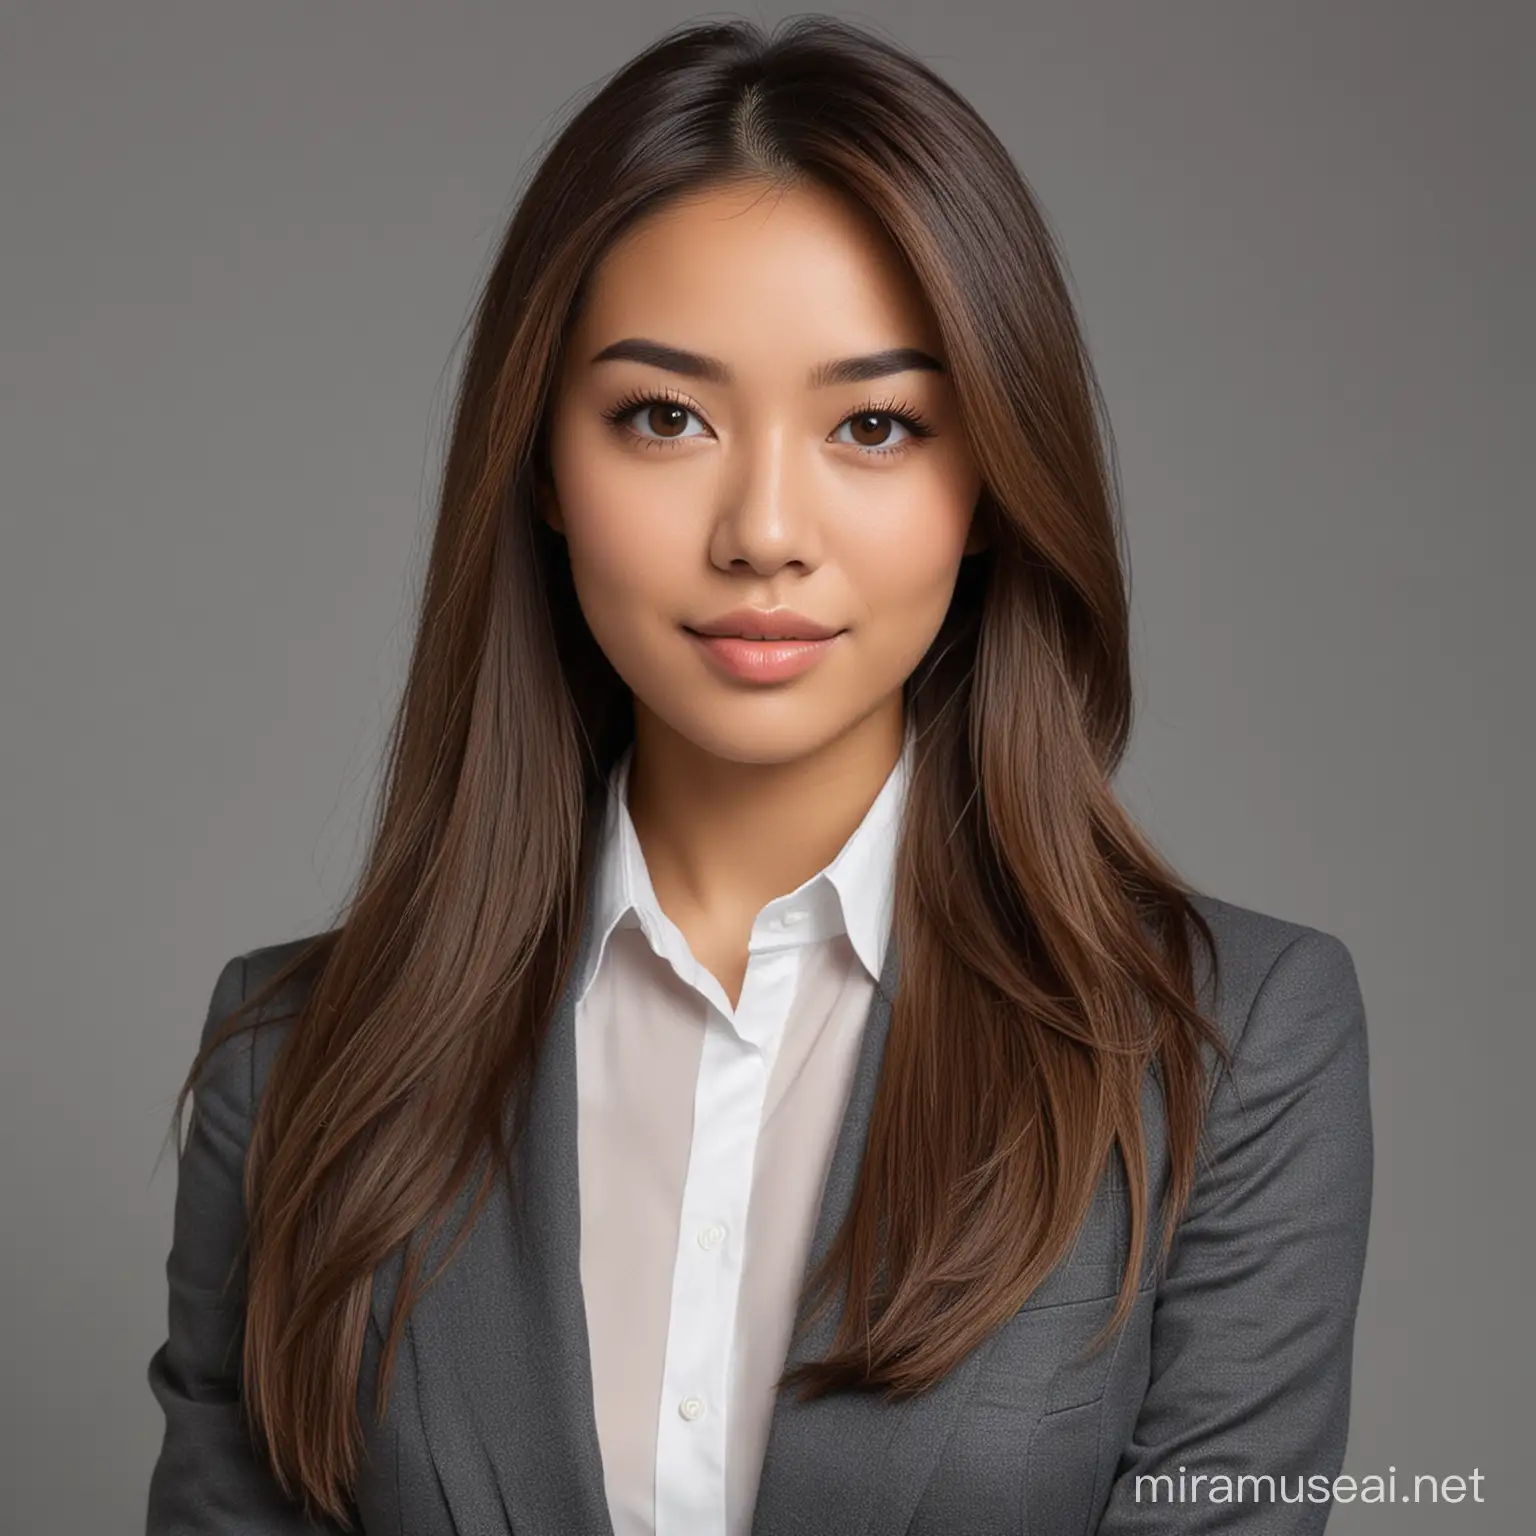 imagine a 24 year old female real estate assistant with bright brown Asian eyes , soft straight hair, realistic